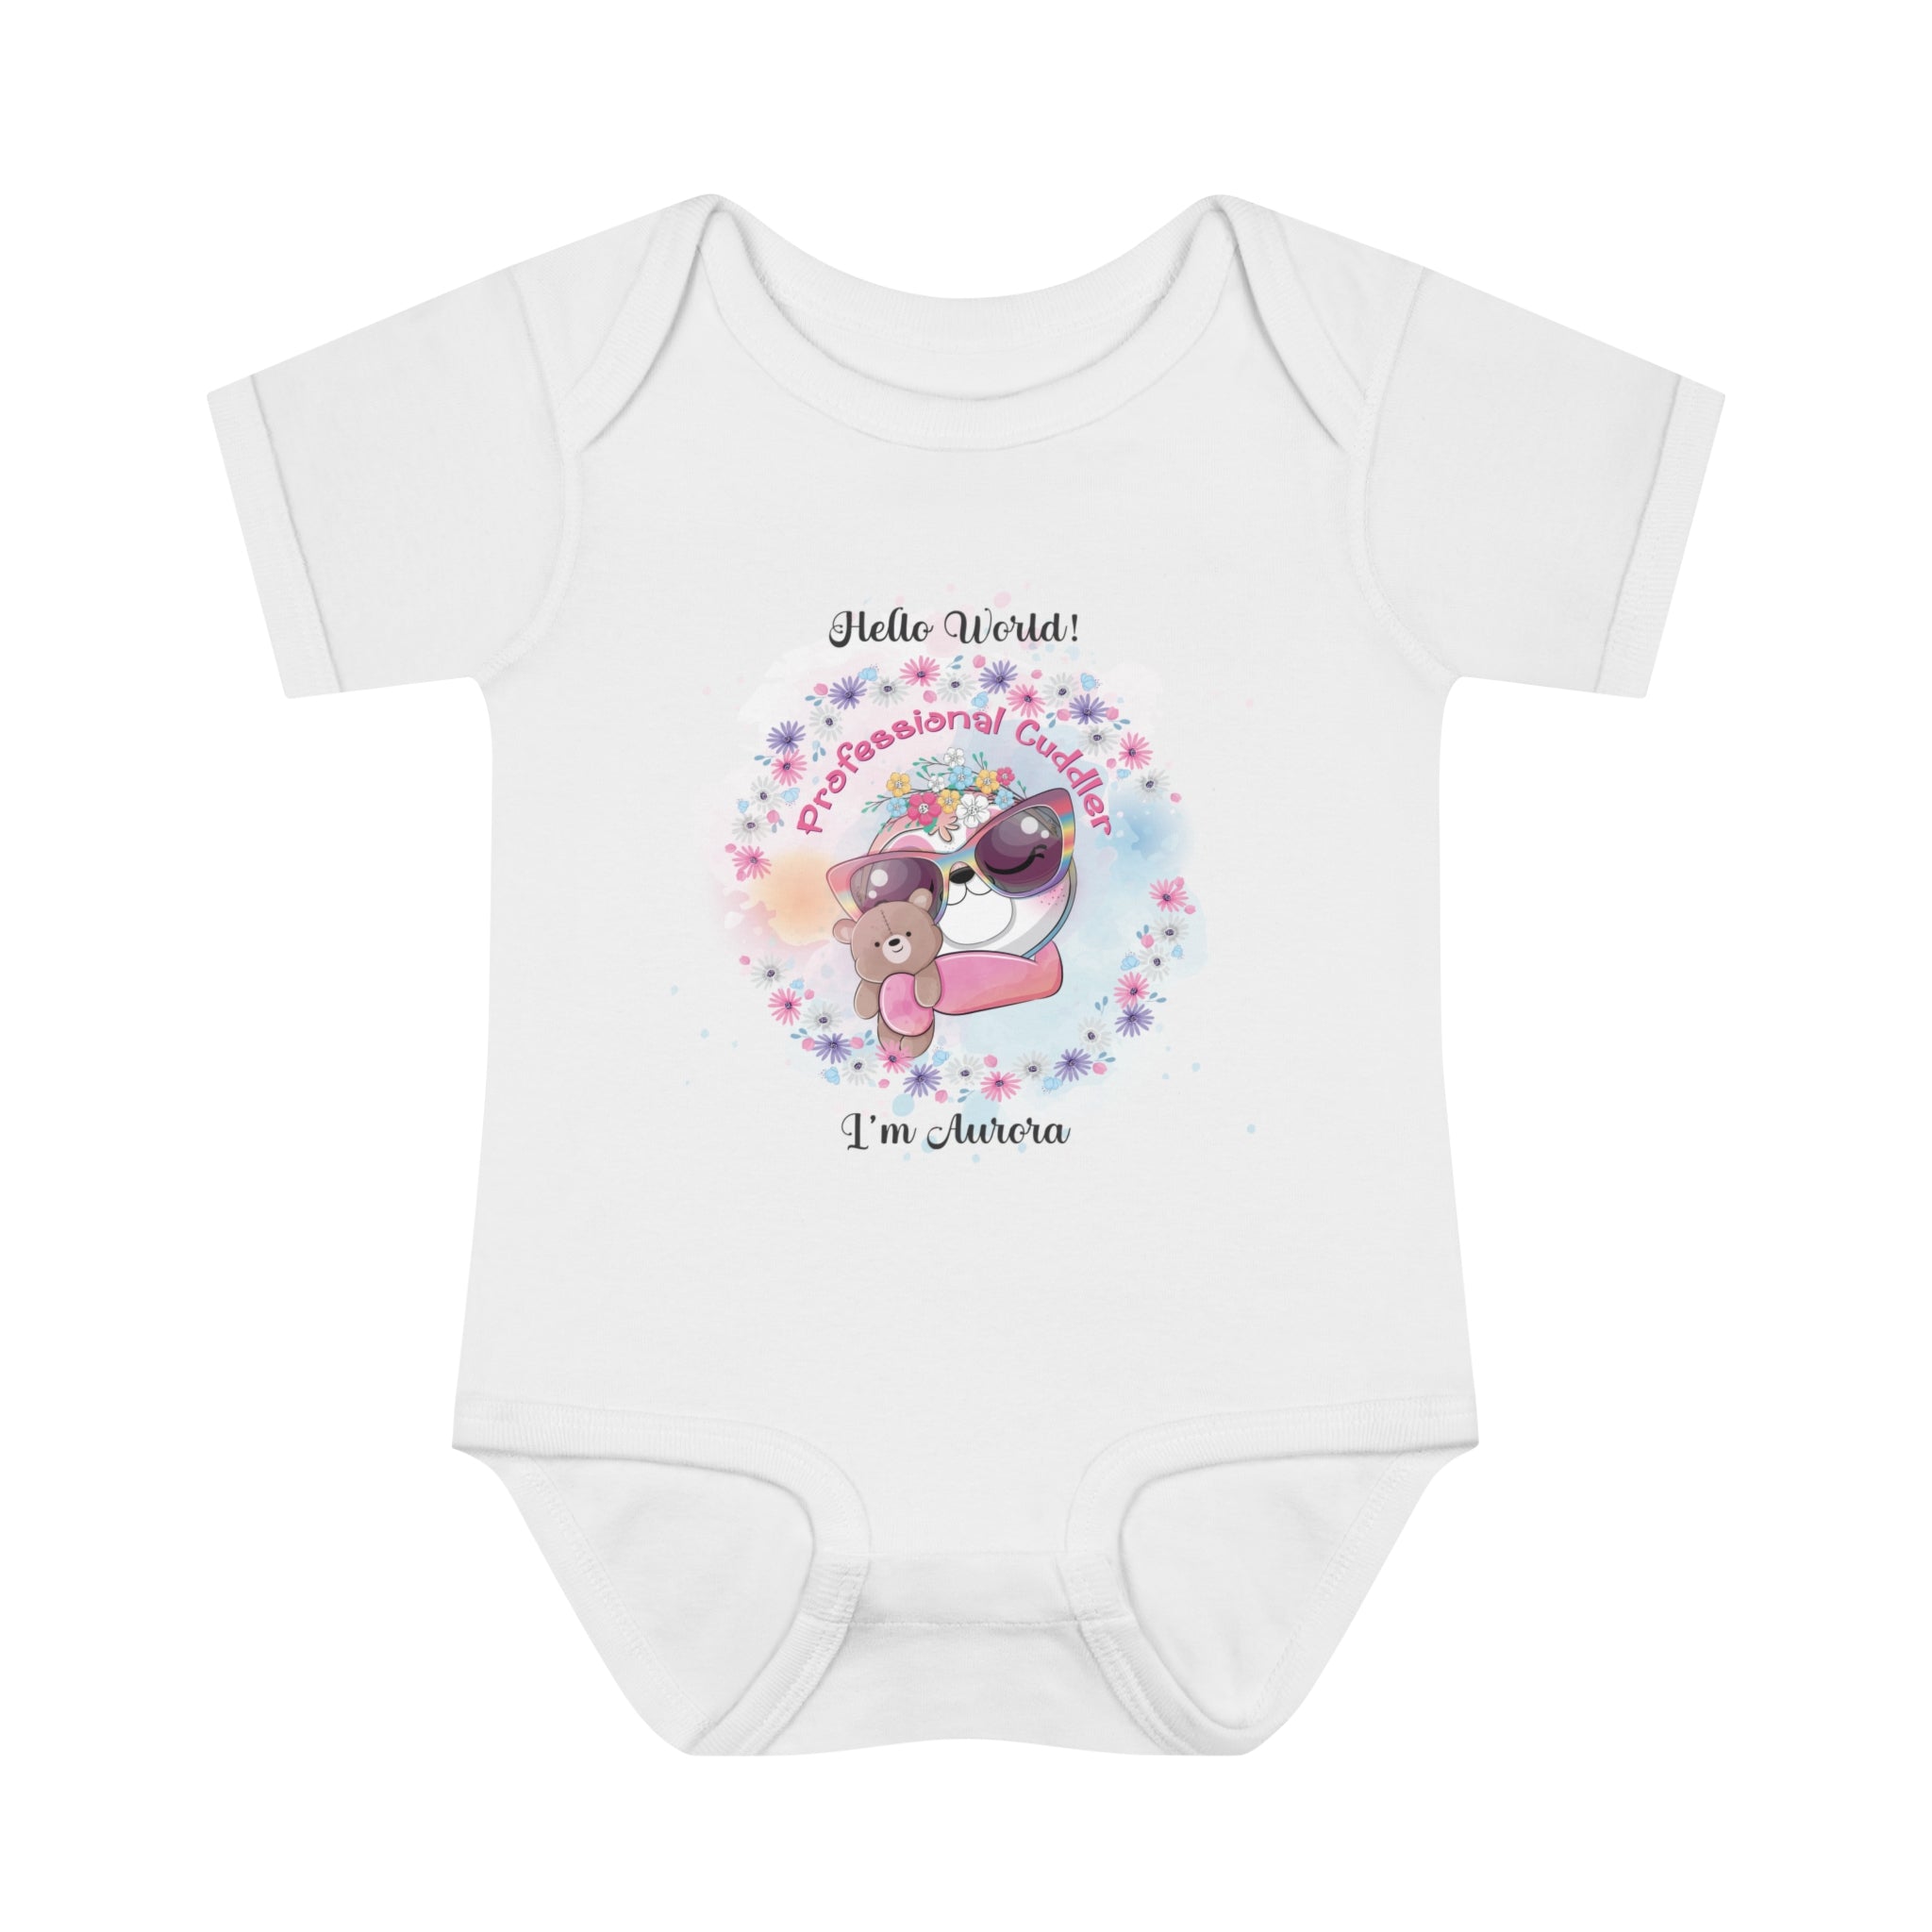  Personalised baby intro, Coming Home Gift, New Baby, Pregnancy Announcement,